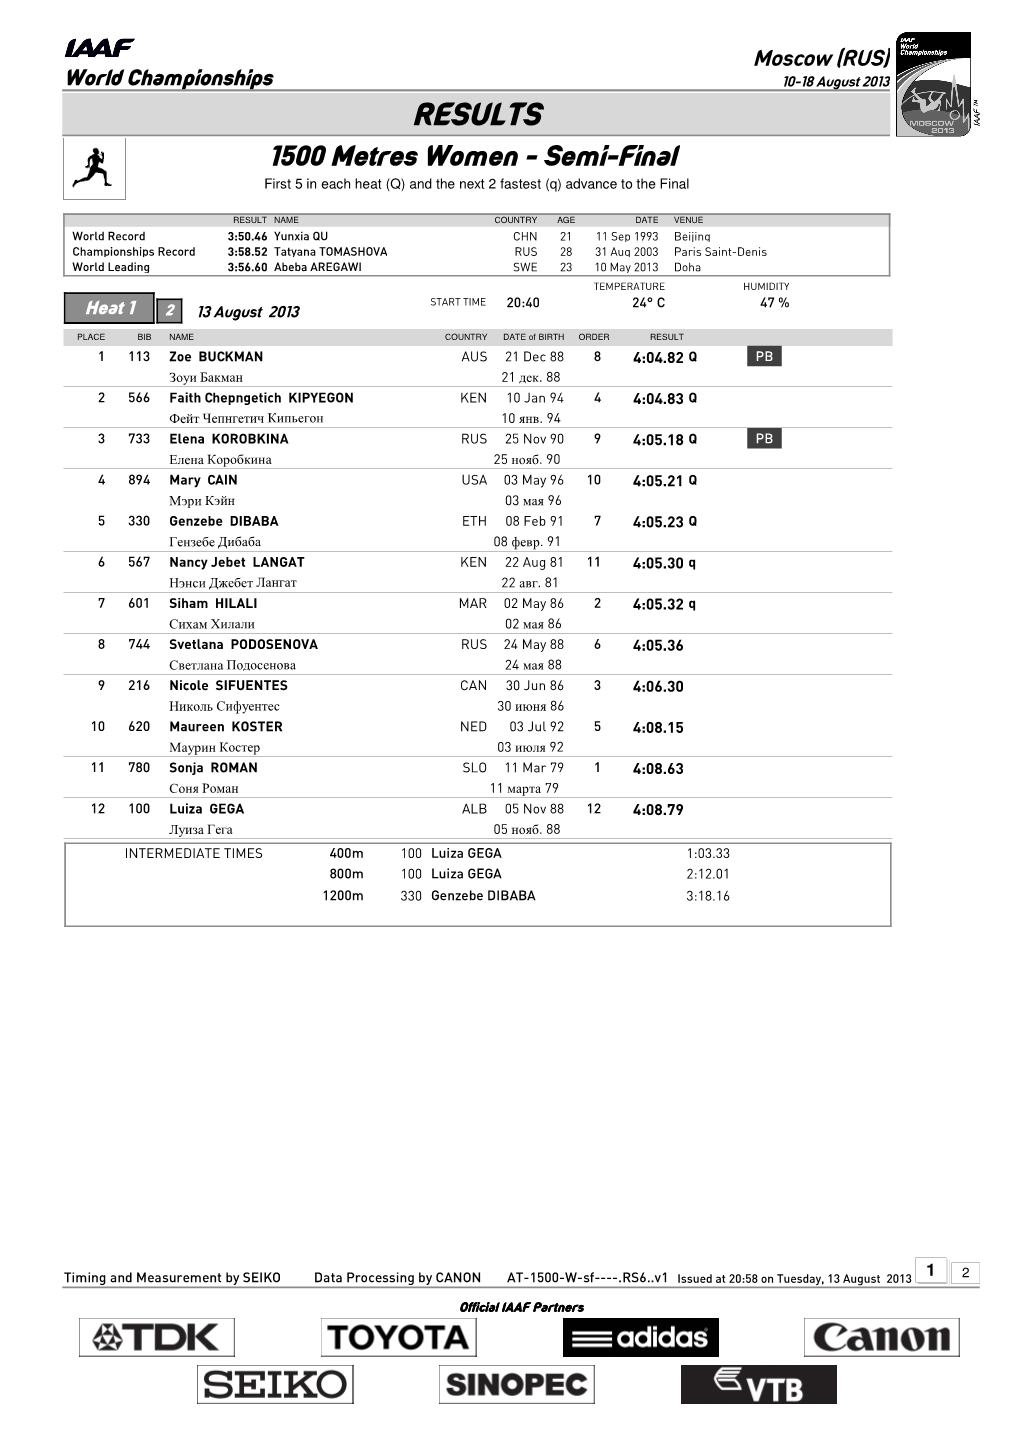 RESULTS 1500 Metres Women - Semi-Final First 5 in Each Heat (Q) and the Next 2 Fastest (Q) Advance to the Final